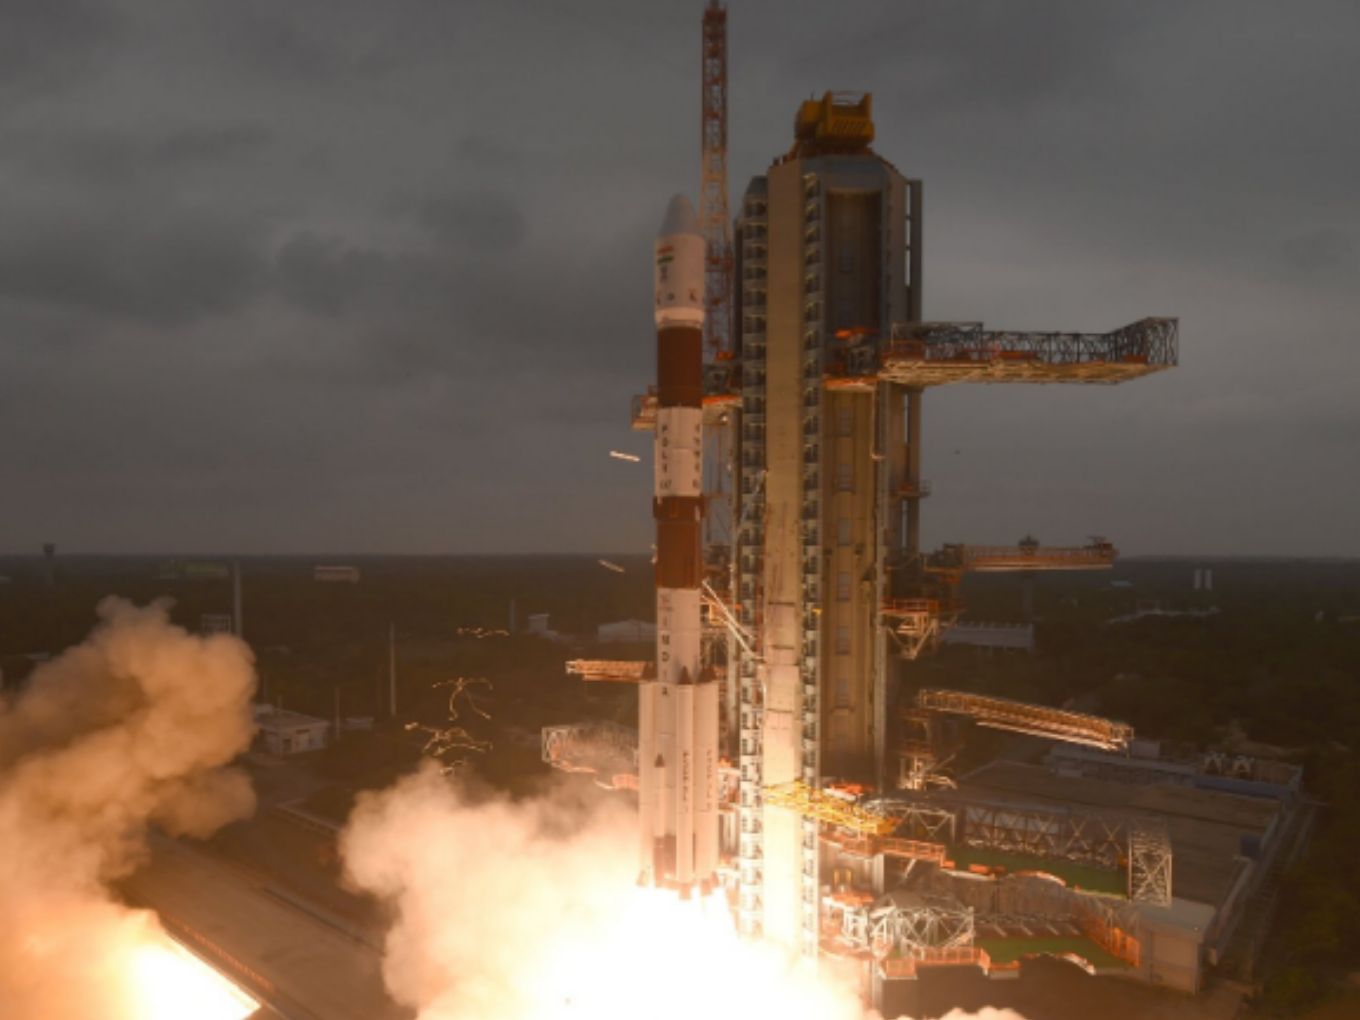 Cartosat-3 Launched: ISRO’s Observation Satellite To Address Urban Planning Needs